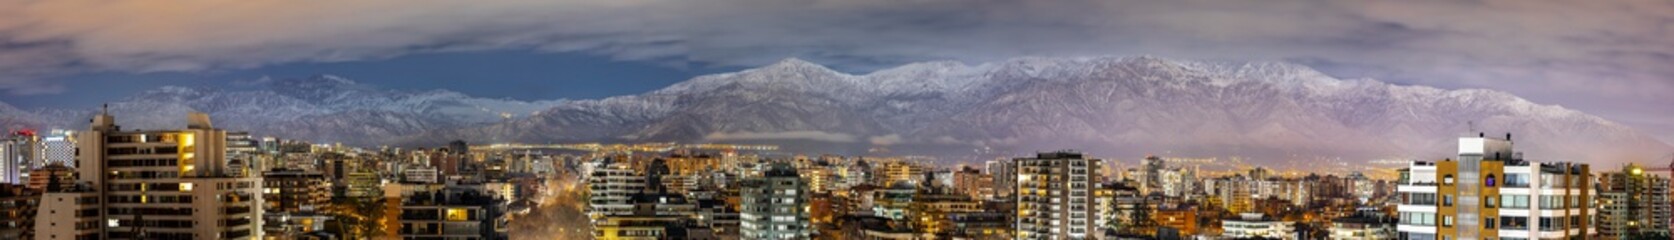 Amazing views of Santiago de Chile skyline by night with the Andes mountain range full of snow and...